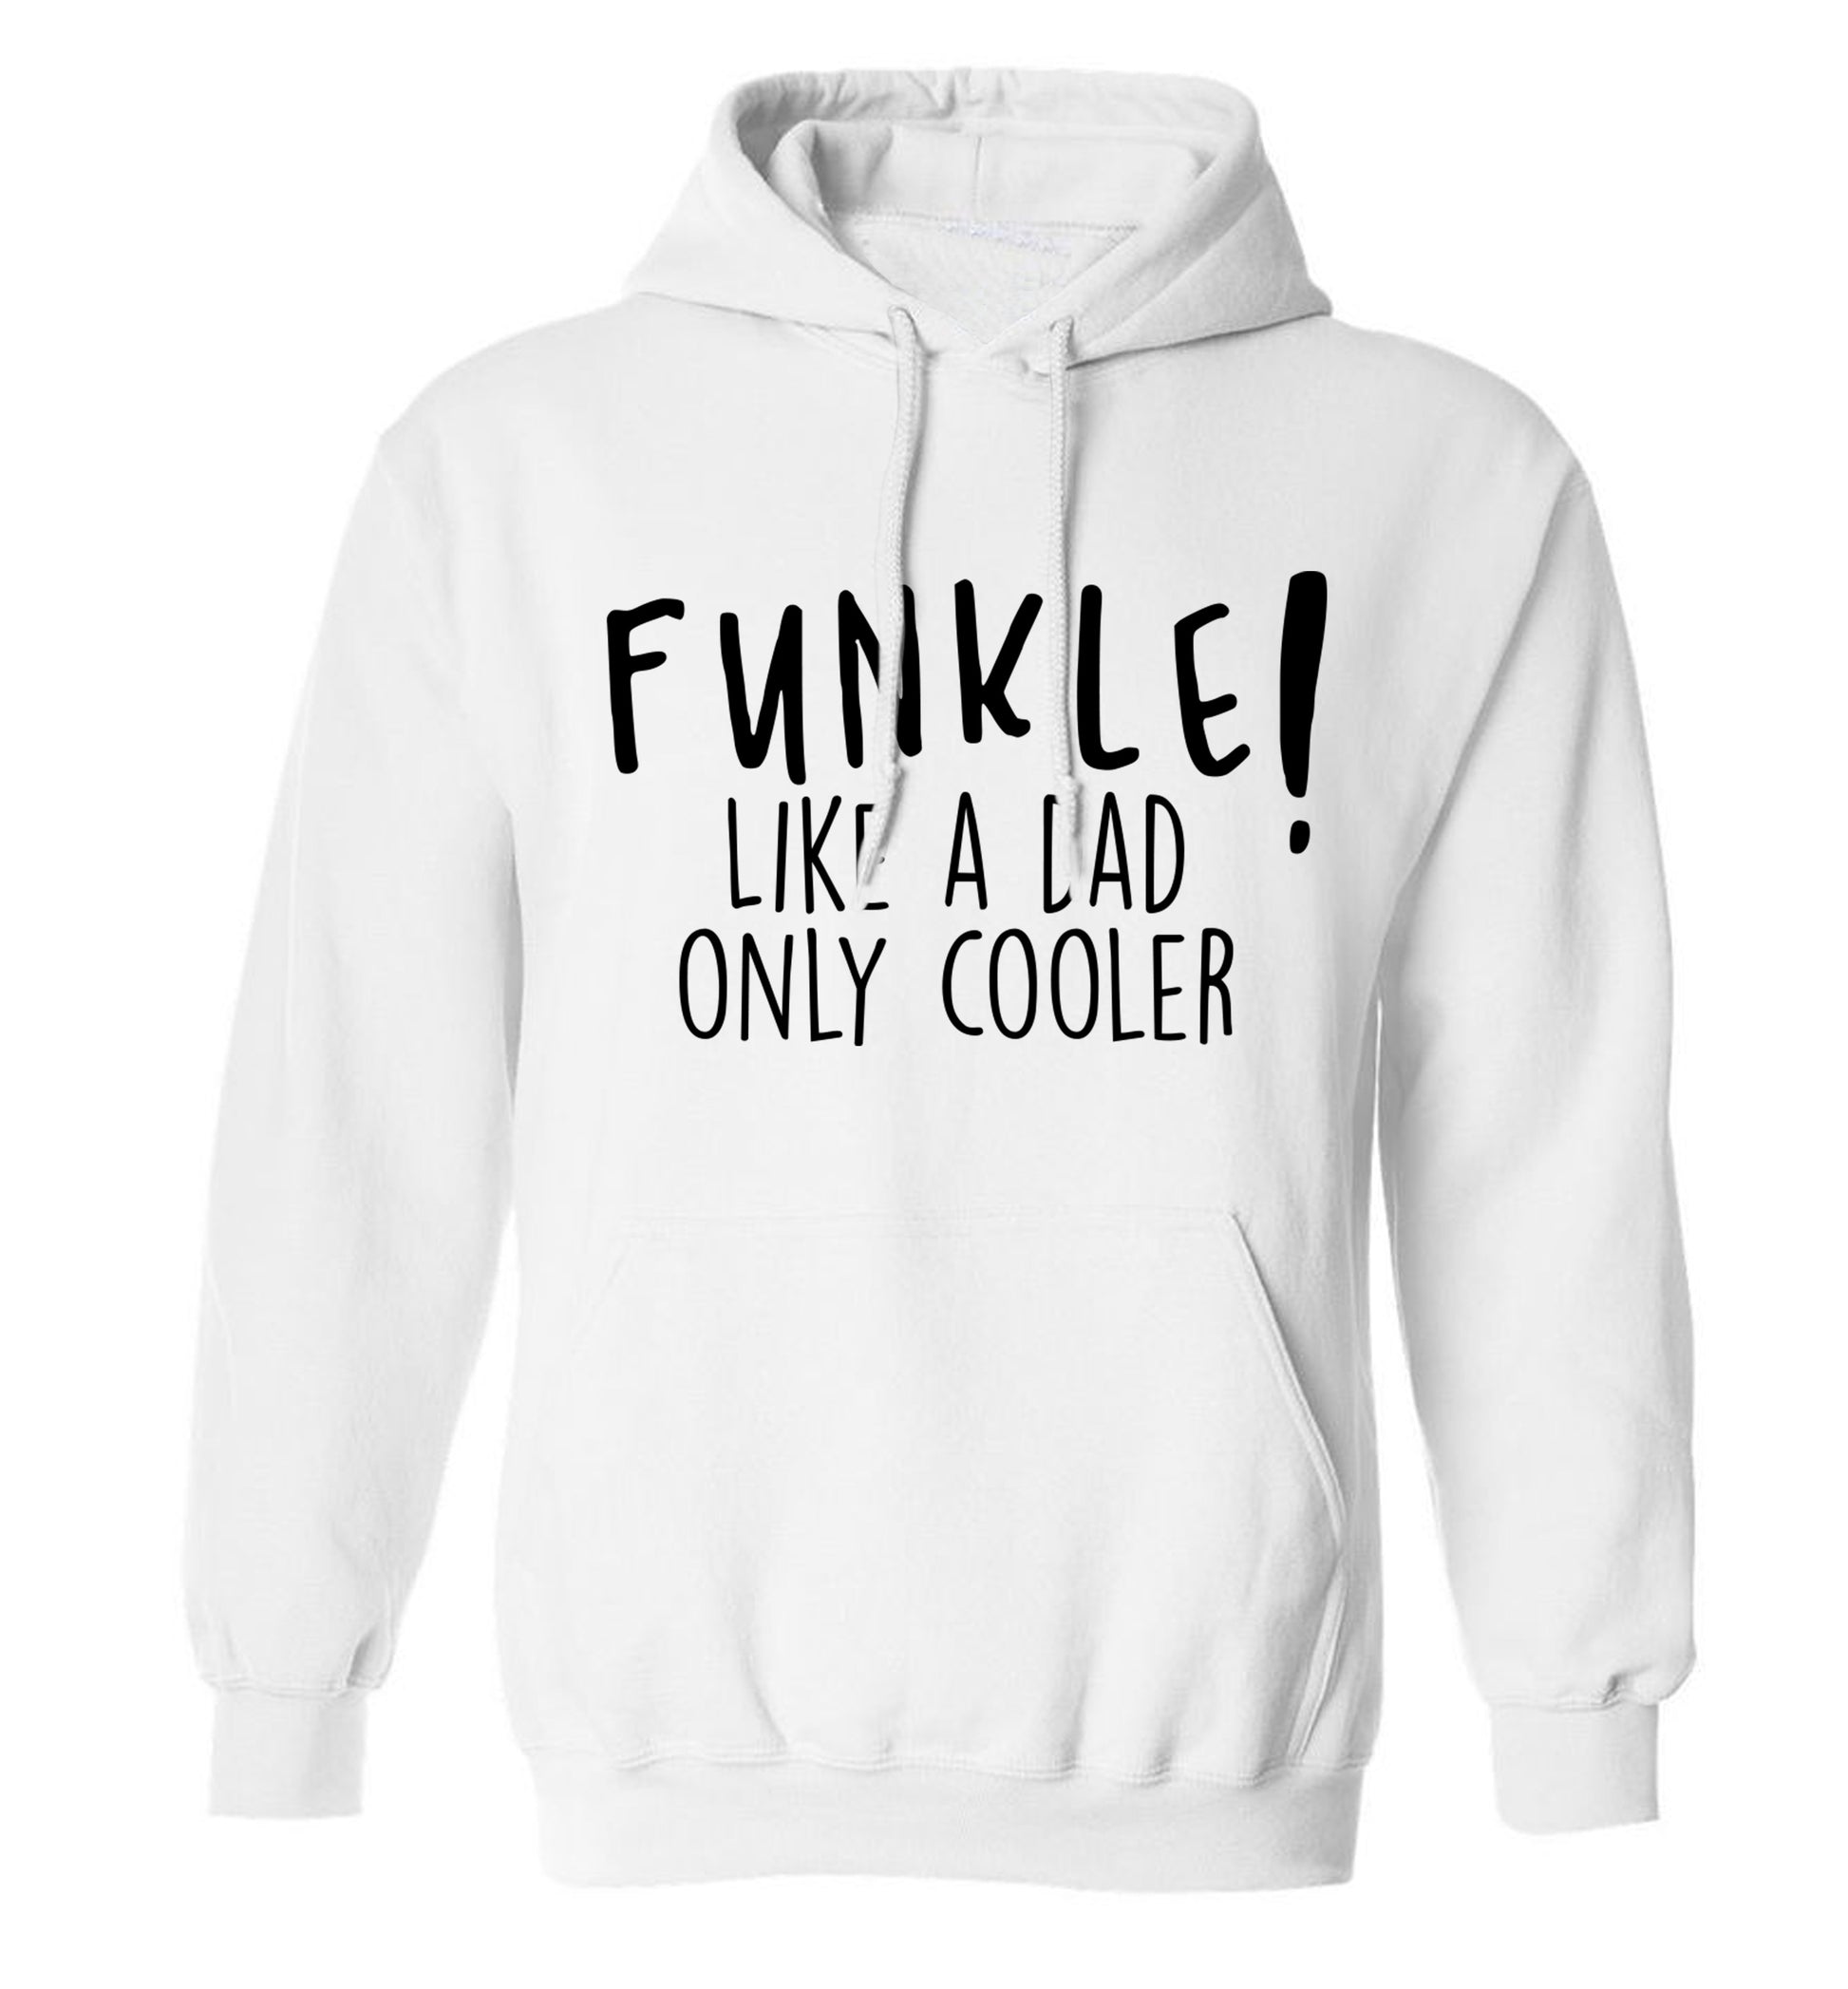 Funkle Like a Dad Only Cooler adults unisex white hoodie 2XL